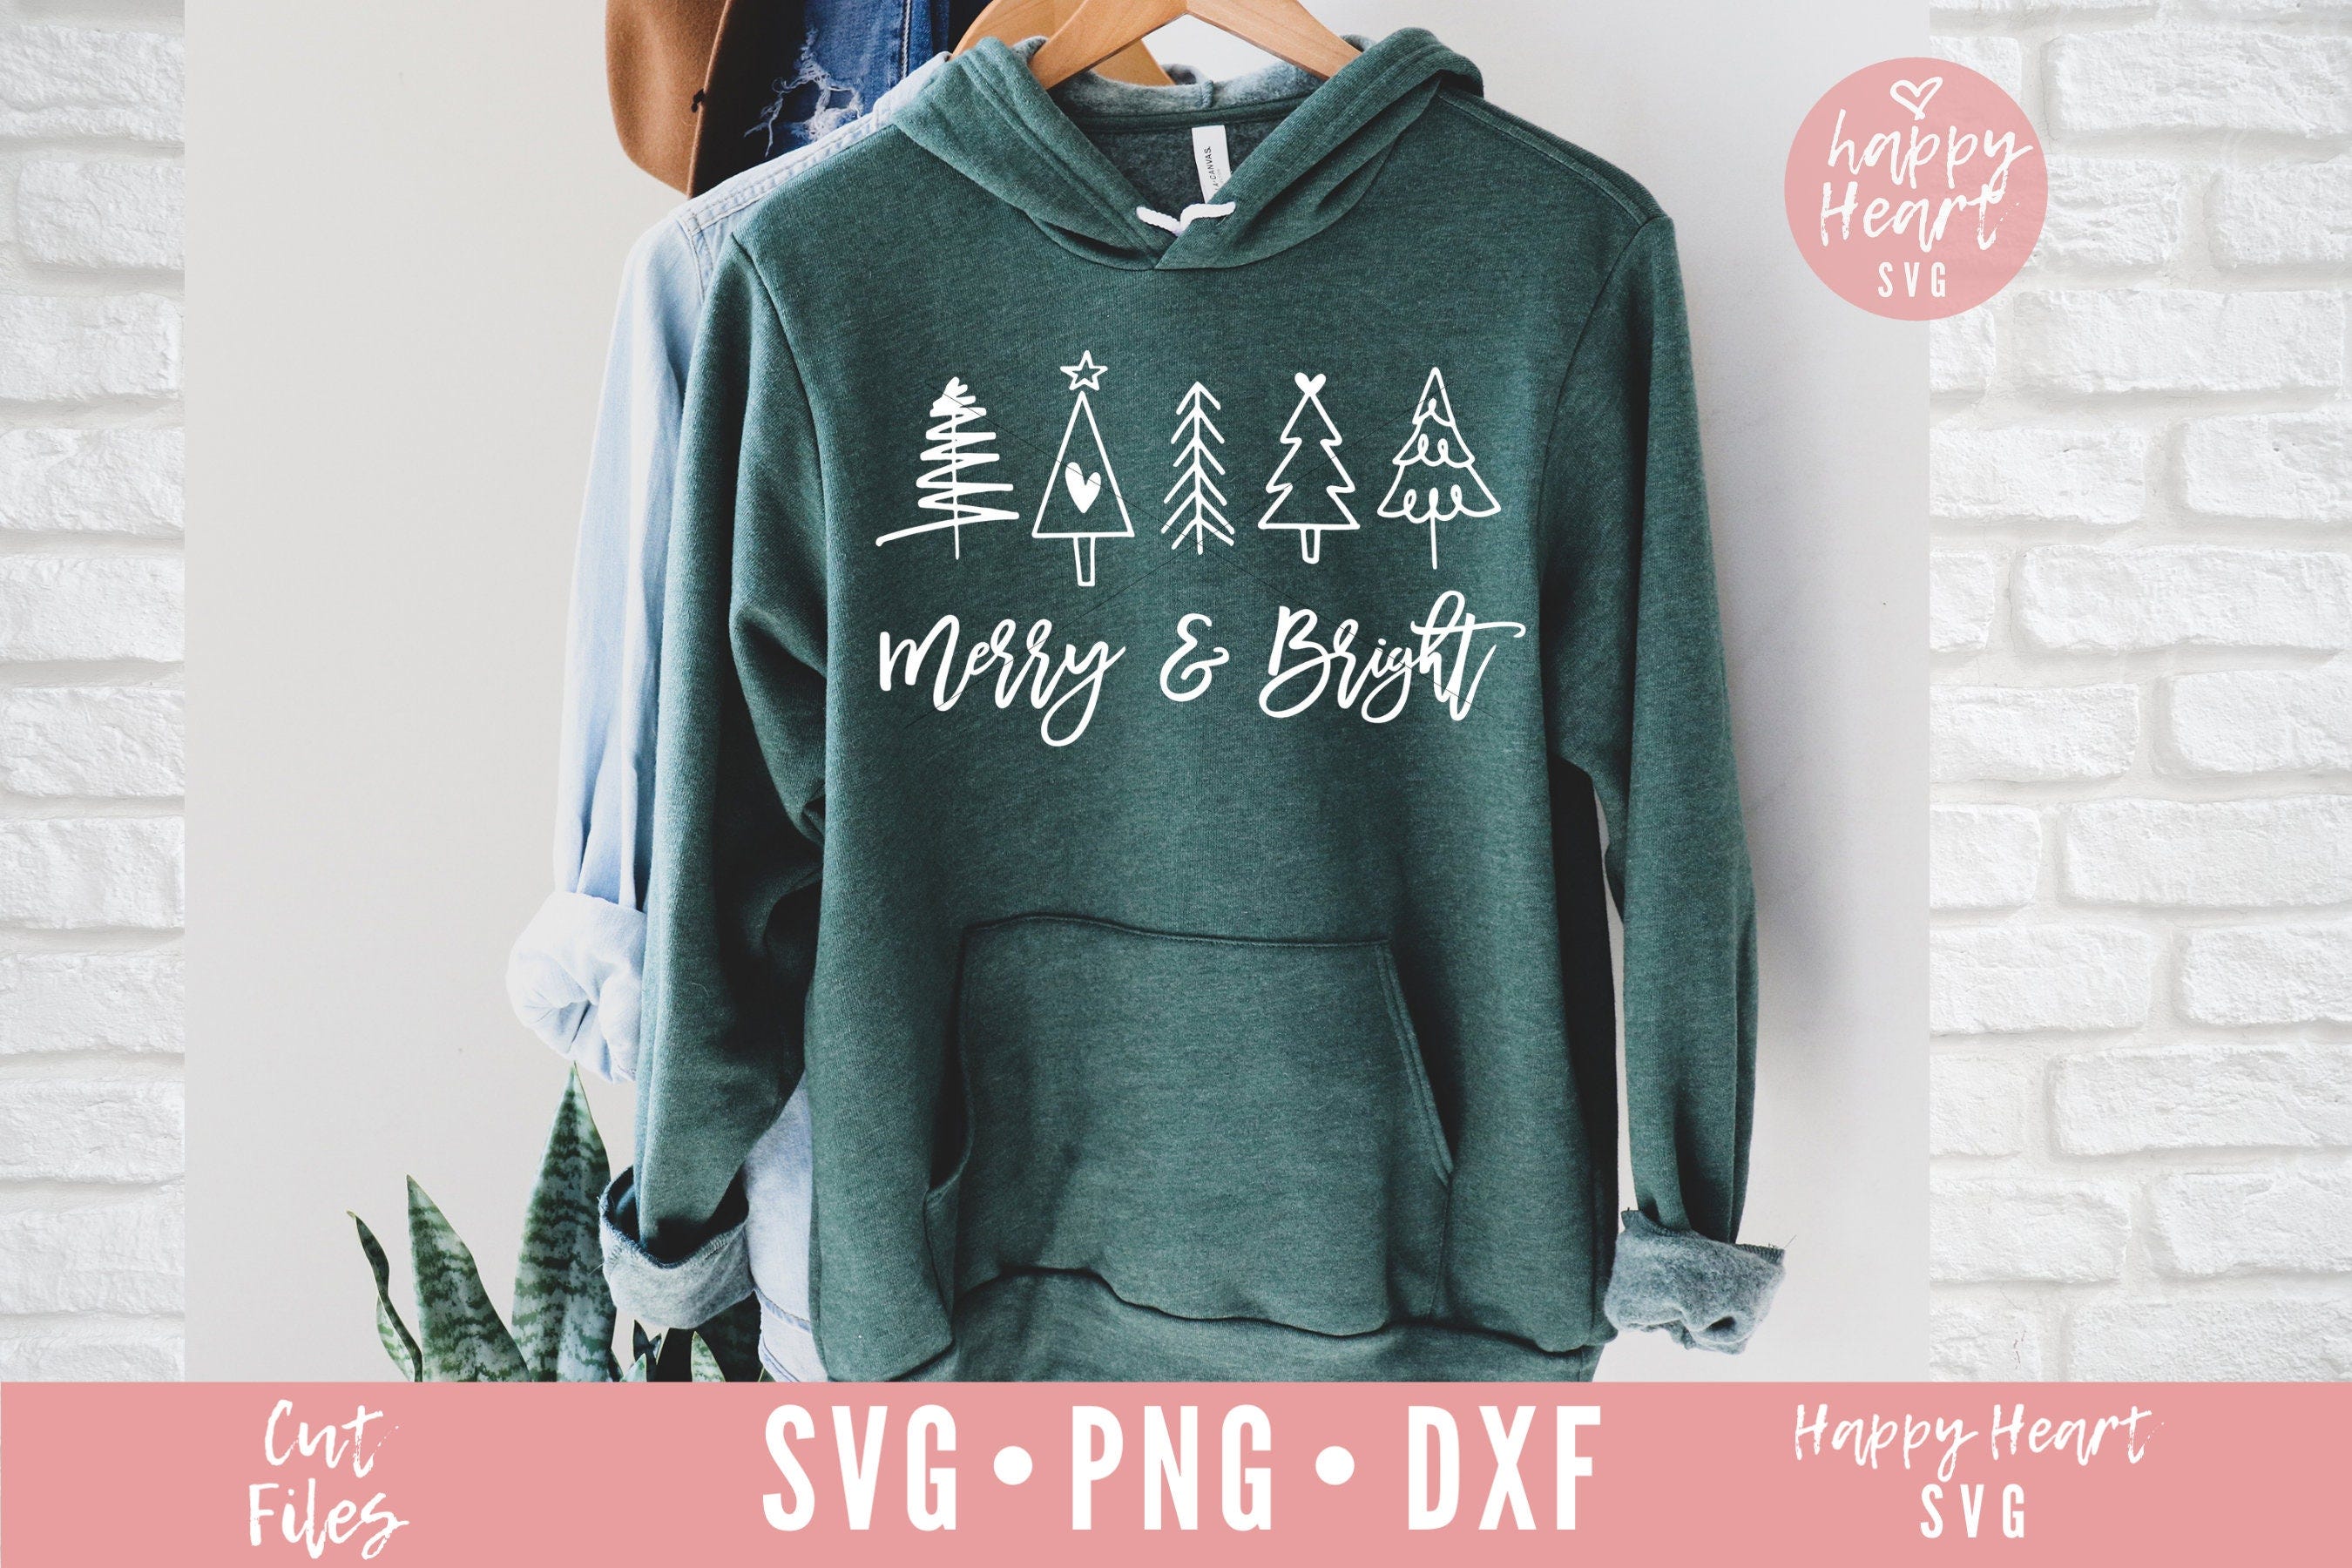 Merry And Bright svg, Christmas svg, dxf, png instant download, Merry Christmas svg, Christmas Saying svg, Christmas Shirt svg, Holiday svg